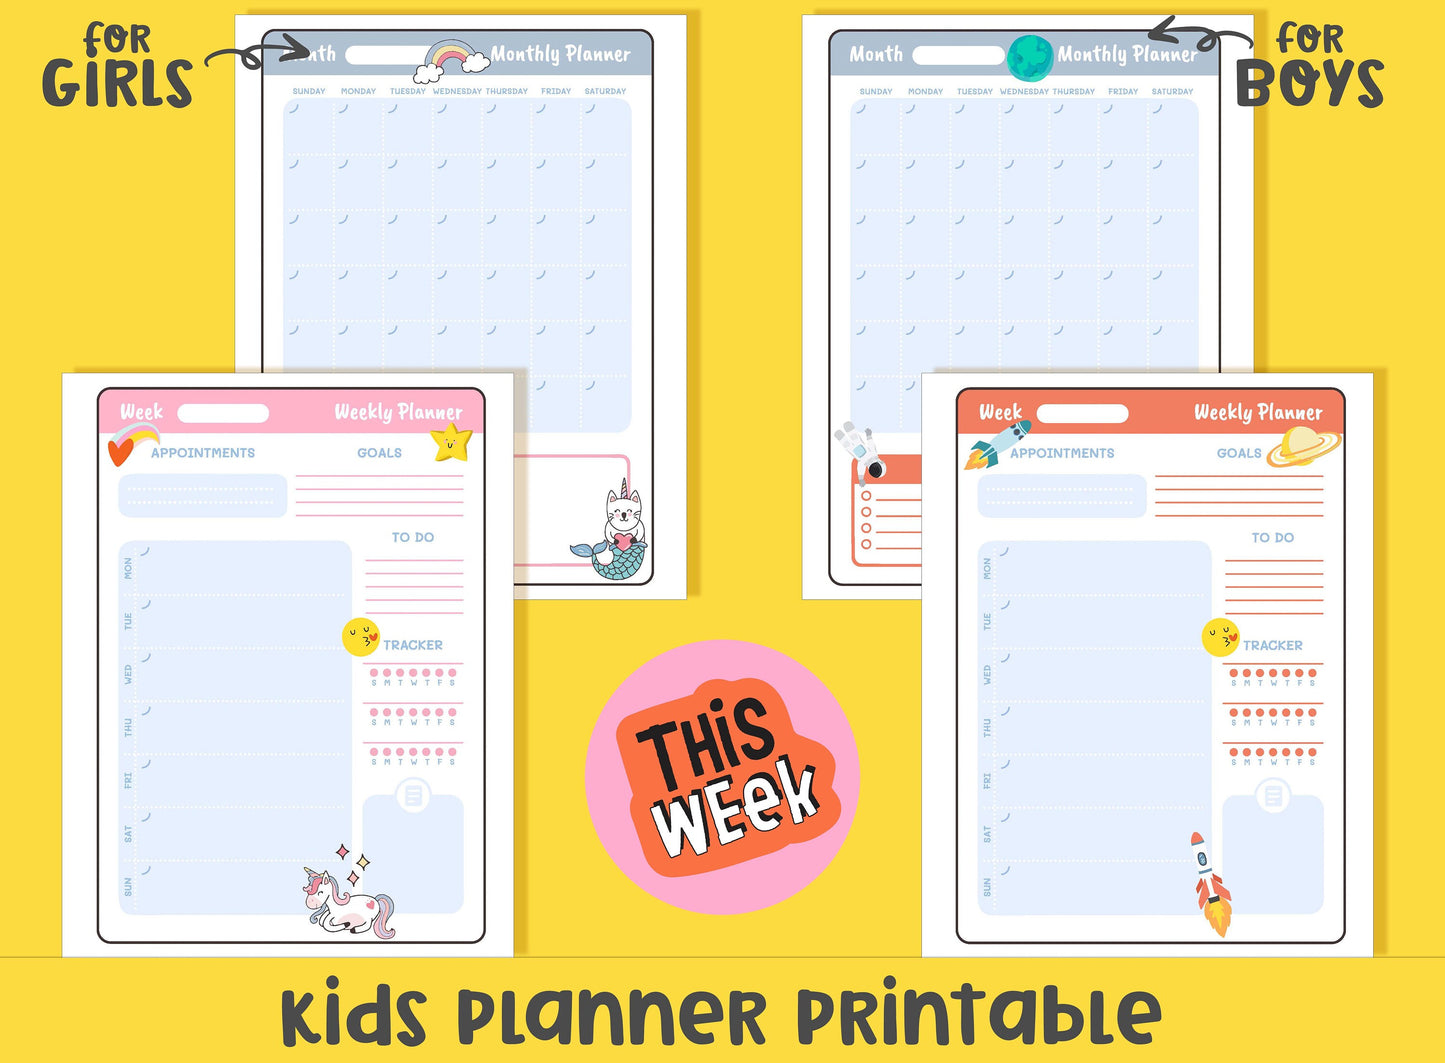 Kids Planner Printable, 2024 Planner, My Funny Planner for Kids, Boys, Girls, Teens, Children's Daily Weekly, Monthly/Yearly  Planner